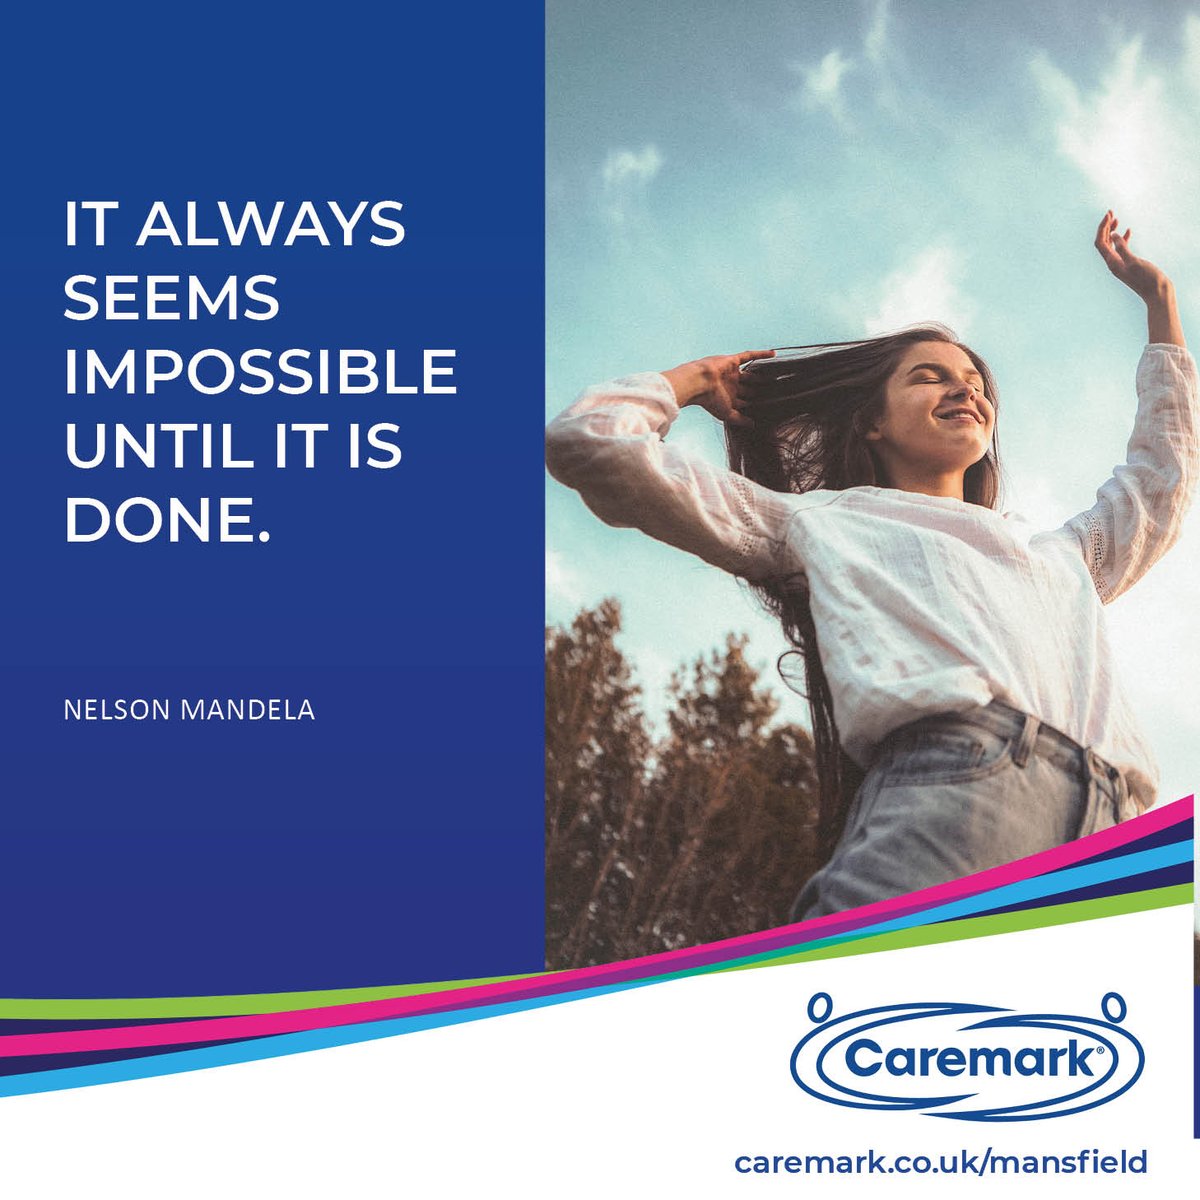 Monday Motivation! Rise and shine, it's time to take on the week! 

Fill your cup with positivity and ambition and make something amazing happen 💪 

#CaremarkMansfield 💙

#MondayMotivation #RiseAndShine #PositiveVibes #MondayVibes #MondayFeels #caremark #wecareuk